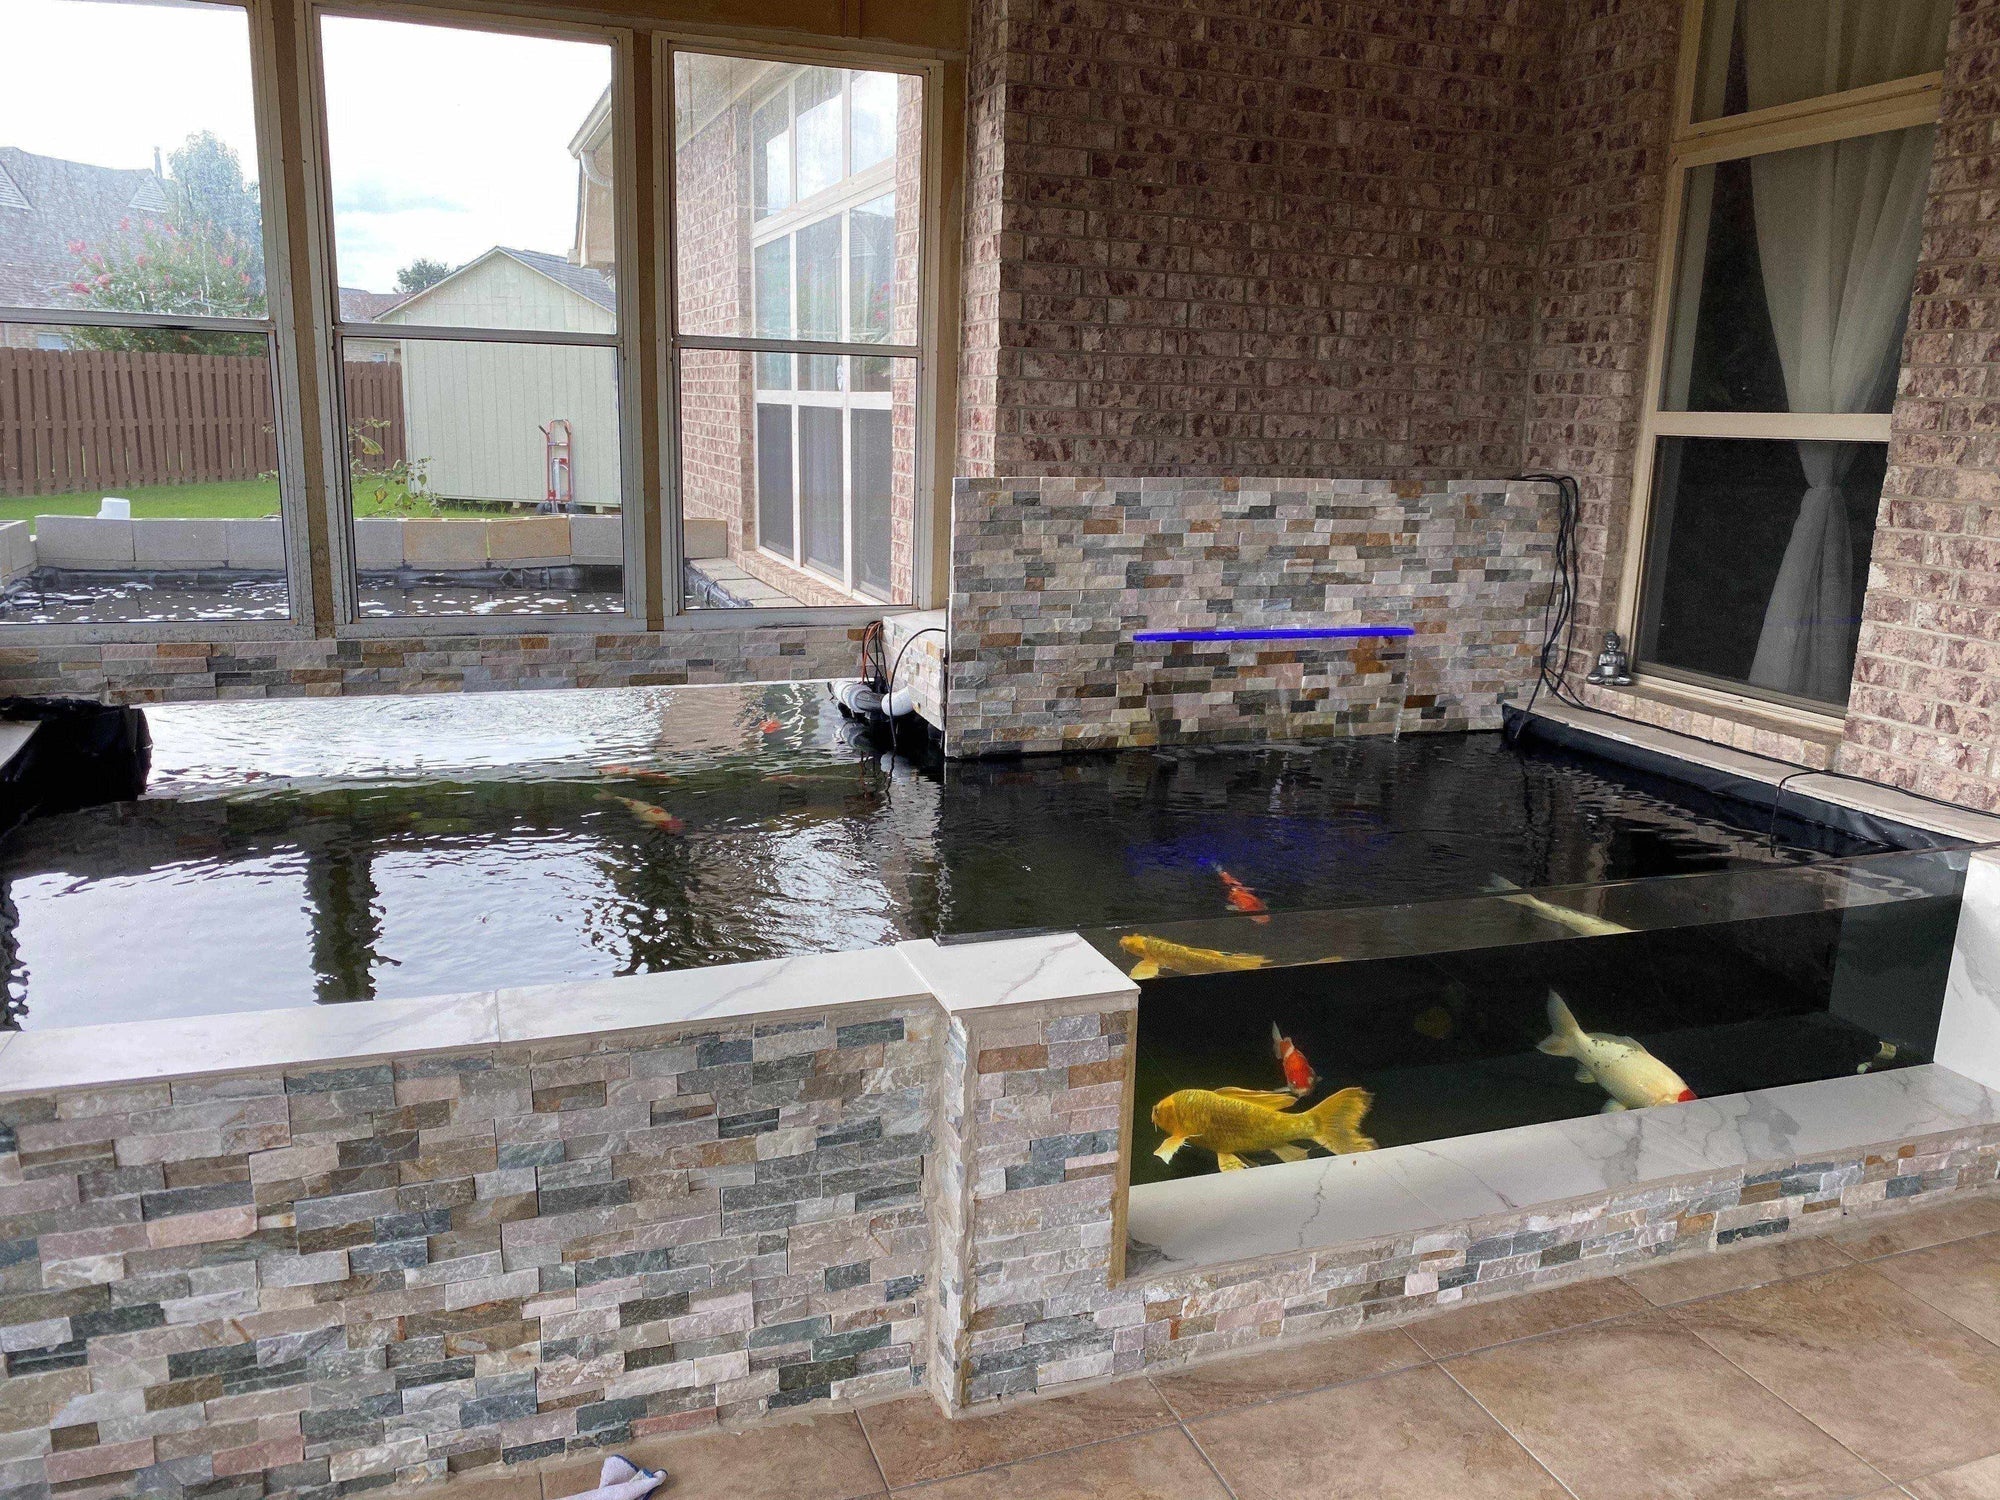 Indoor/Outdoor Koi Pond - One of a Kind - By Phuoc Tran